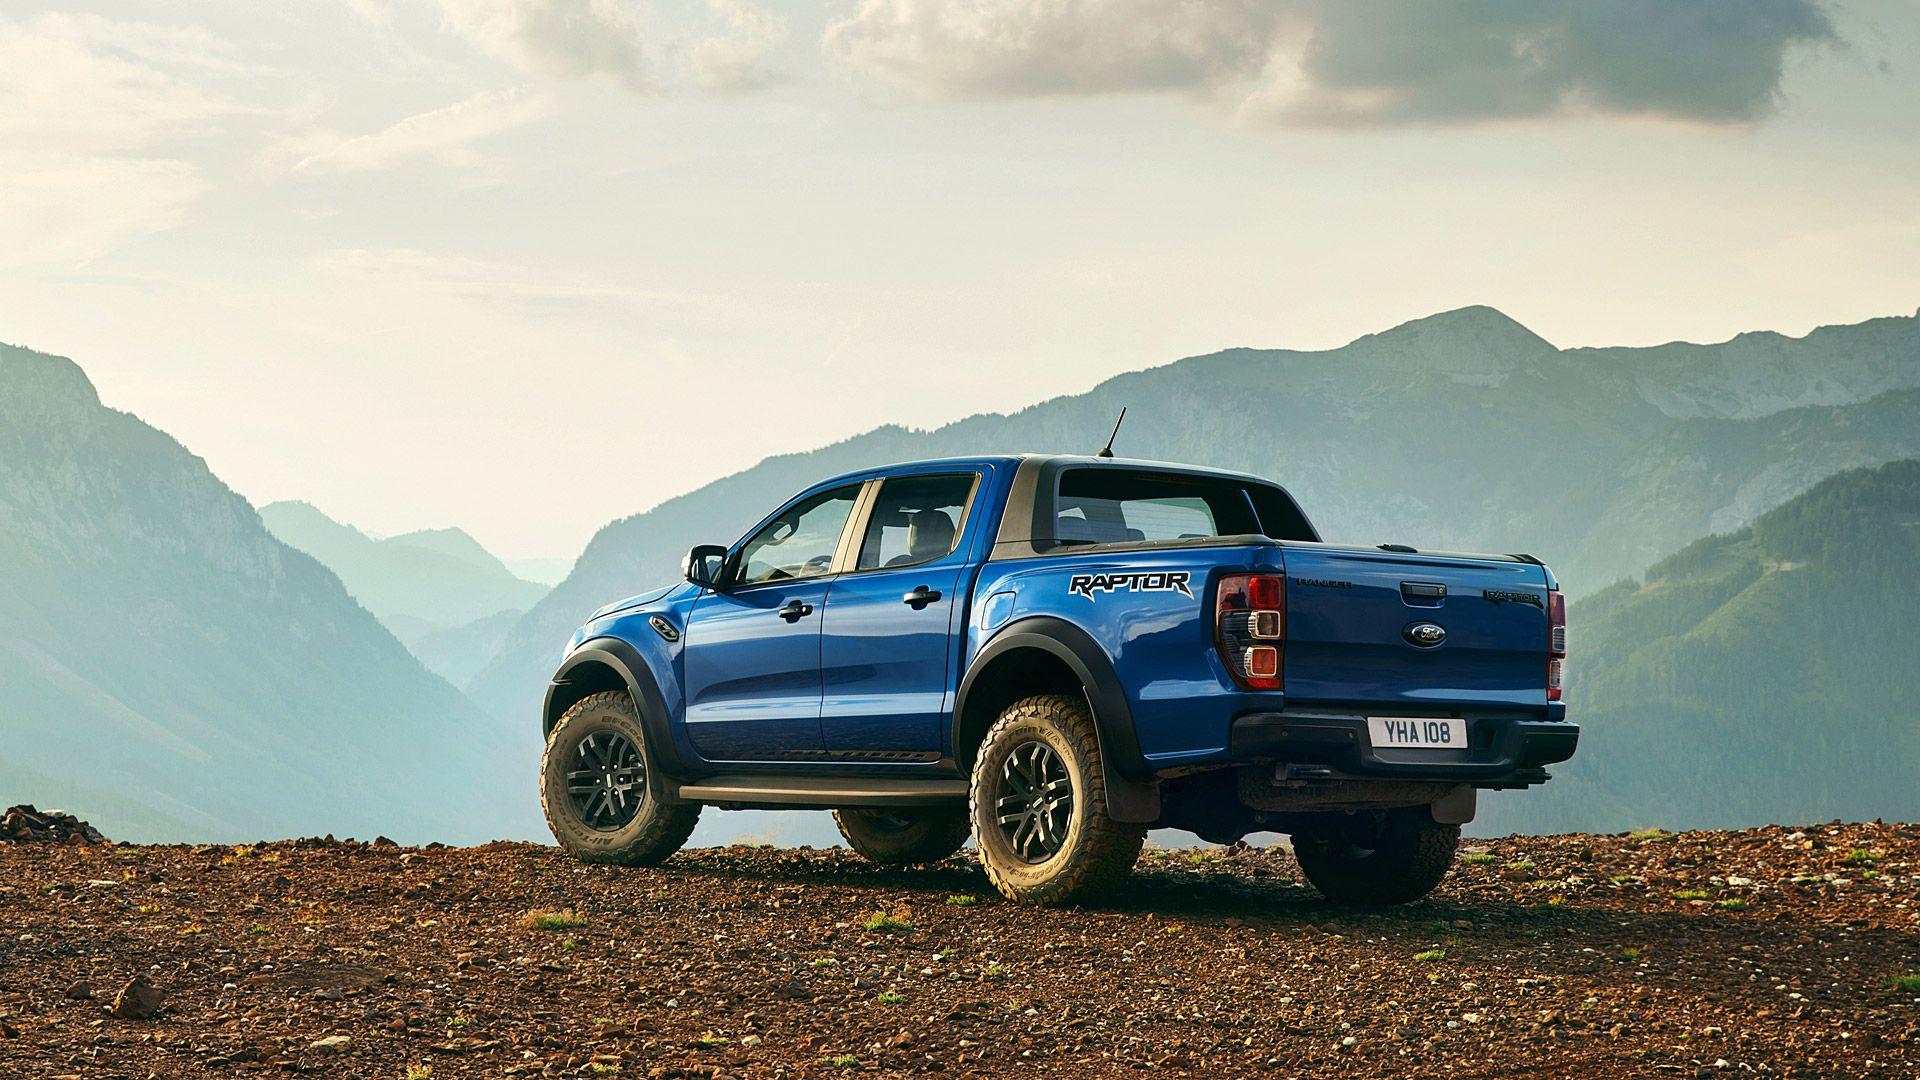 1998 Ford Ranger Offroad 4x4 Custom Truck Wallpapers Hd Desktop And Mobile Backgrounds